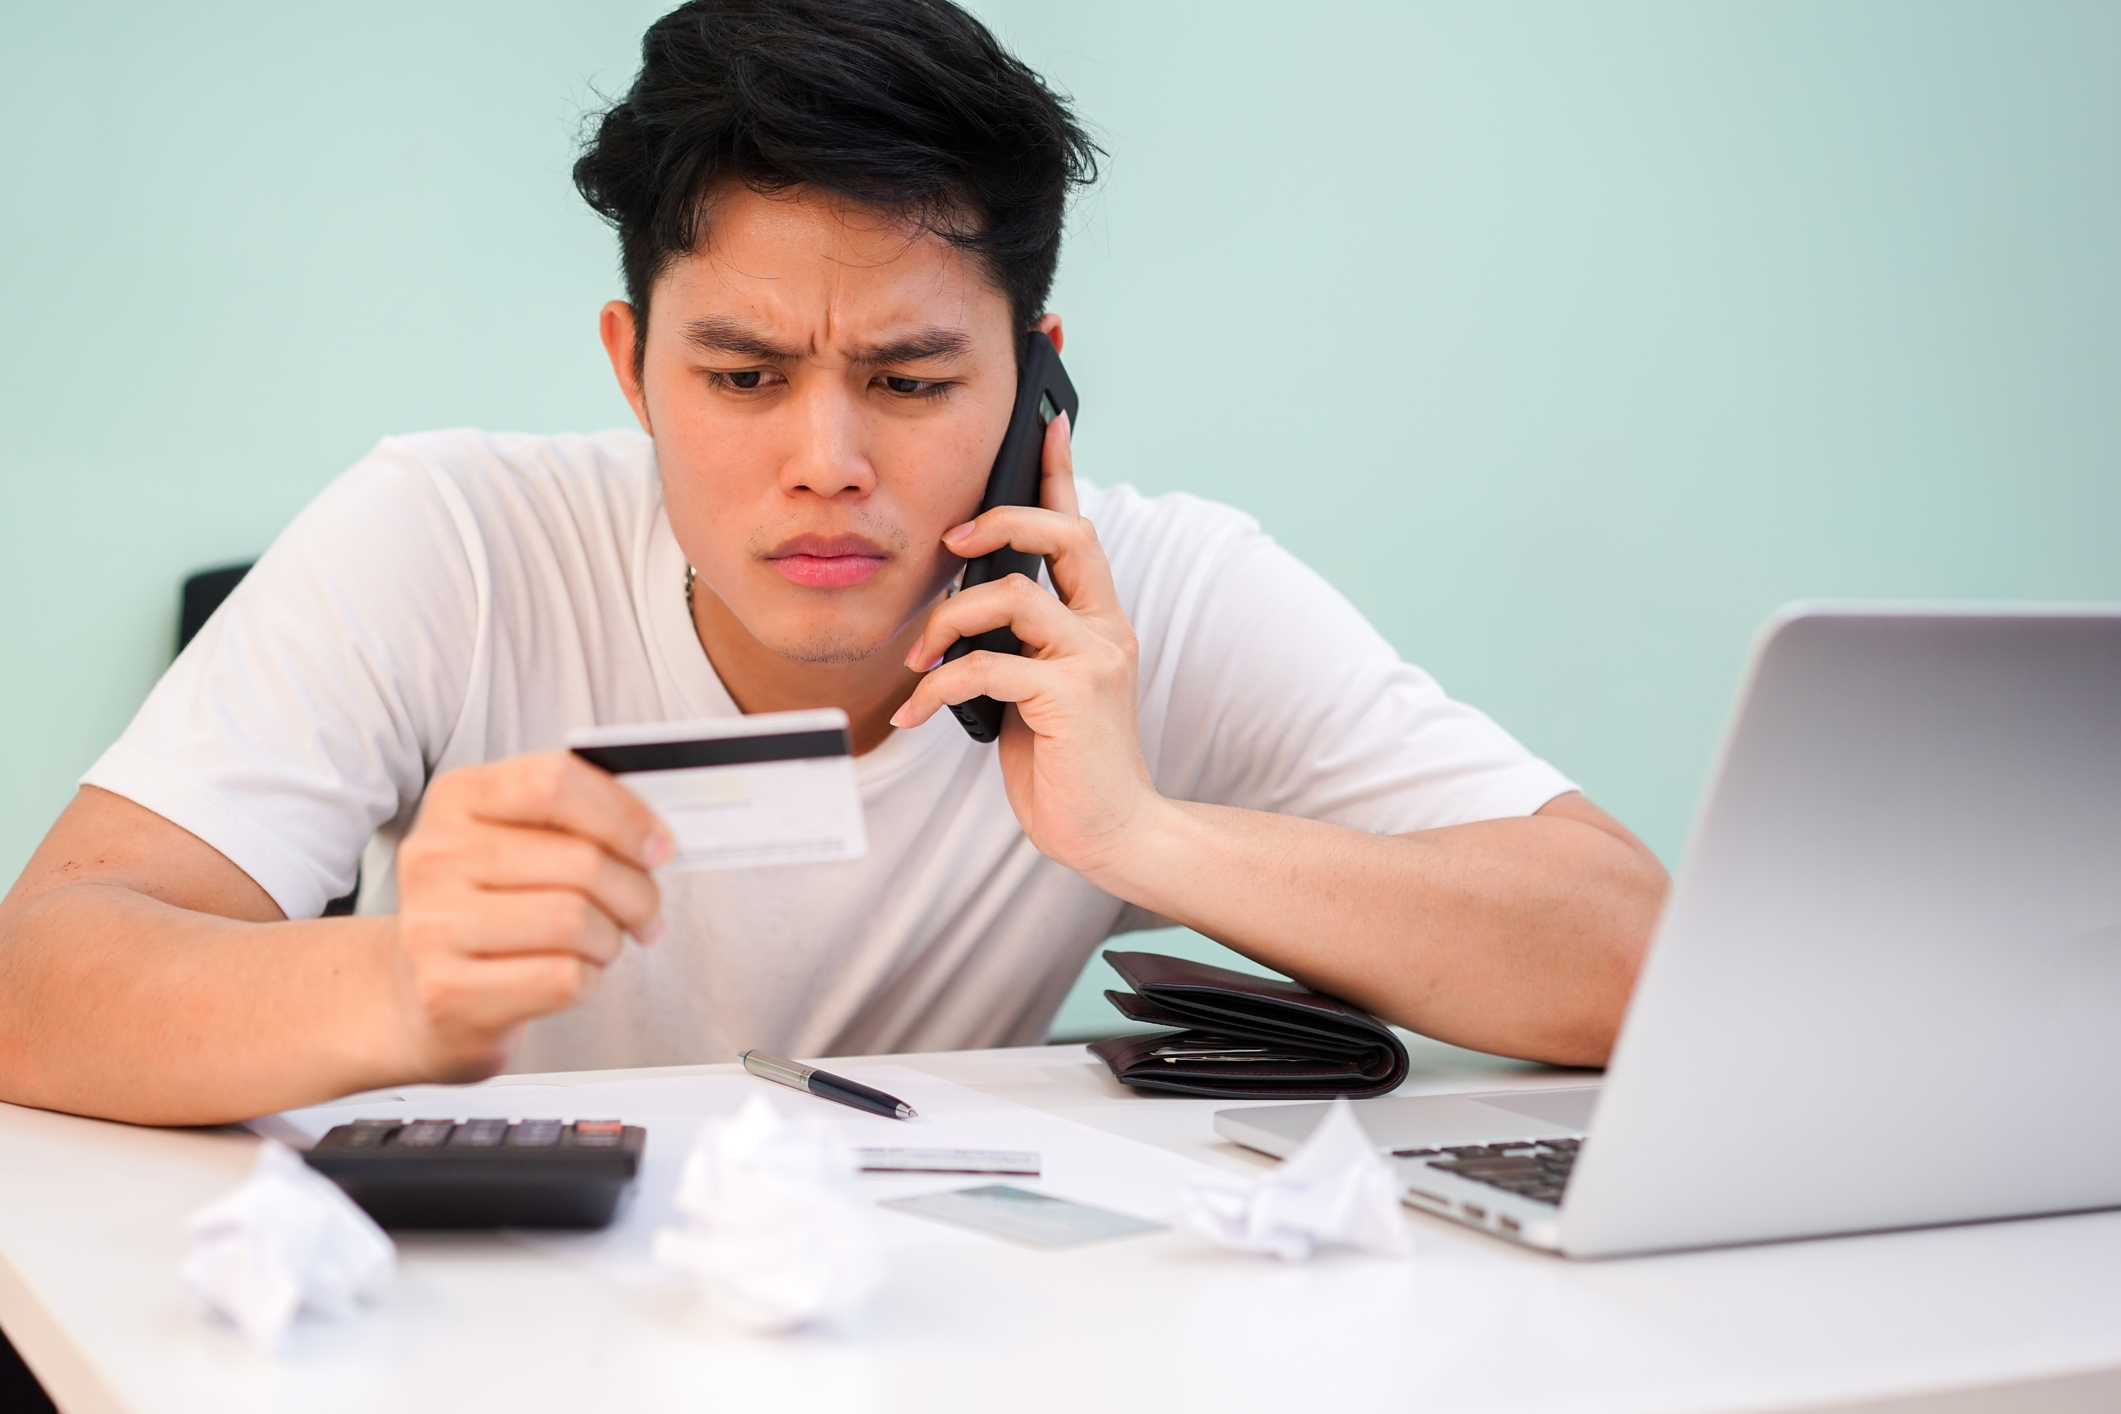 The Top 3 Mistakes to Avoid When Paying Your Credit Card Bill